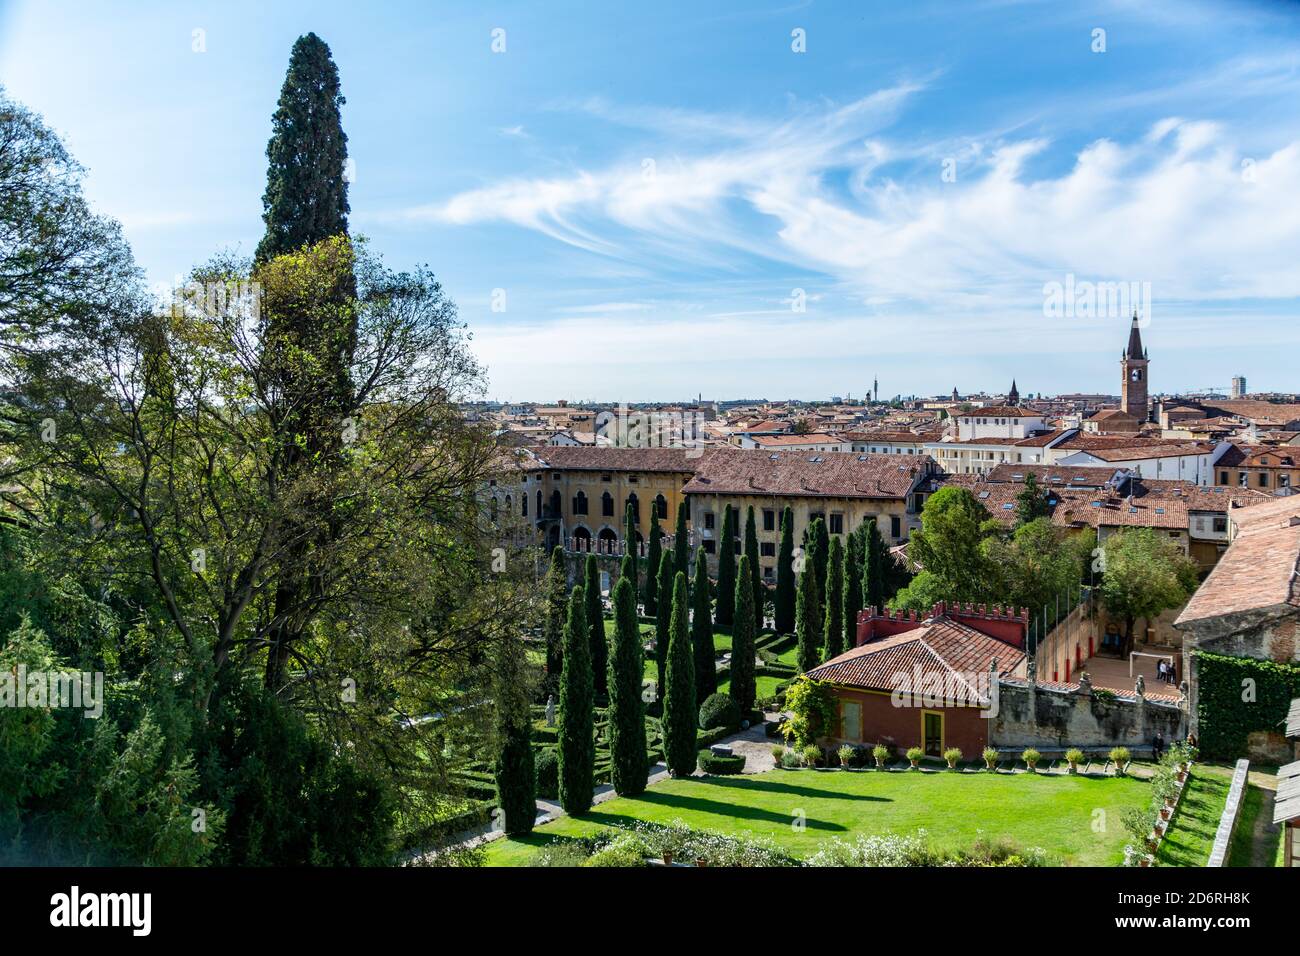 Beautiful view of Giusti gardens and look out over Italian city Verona. Trees and flowers in front of Verona skyline and houses. No people Stock Photo